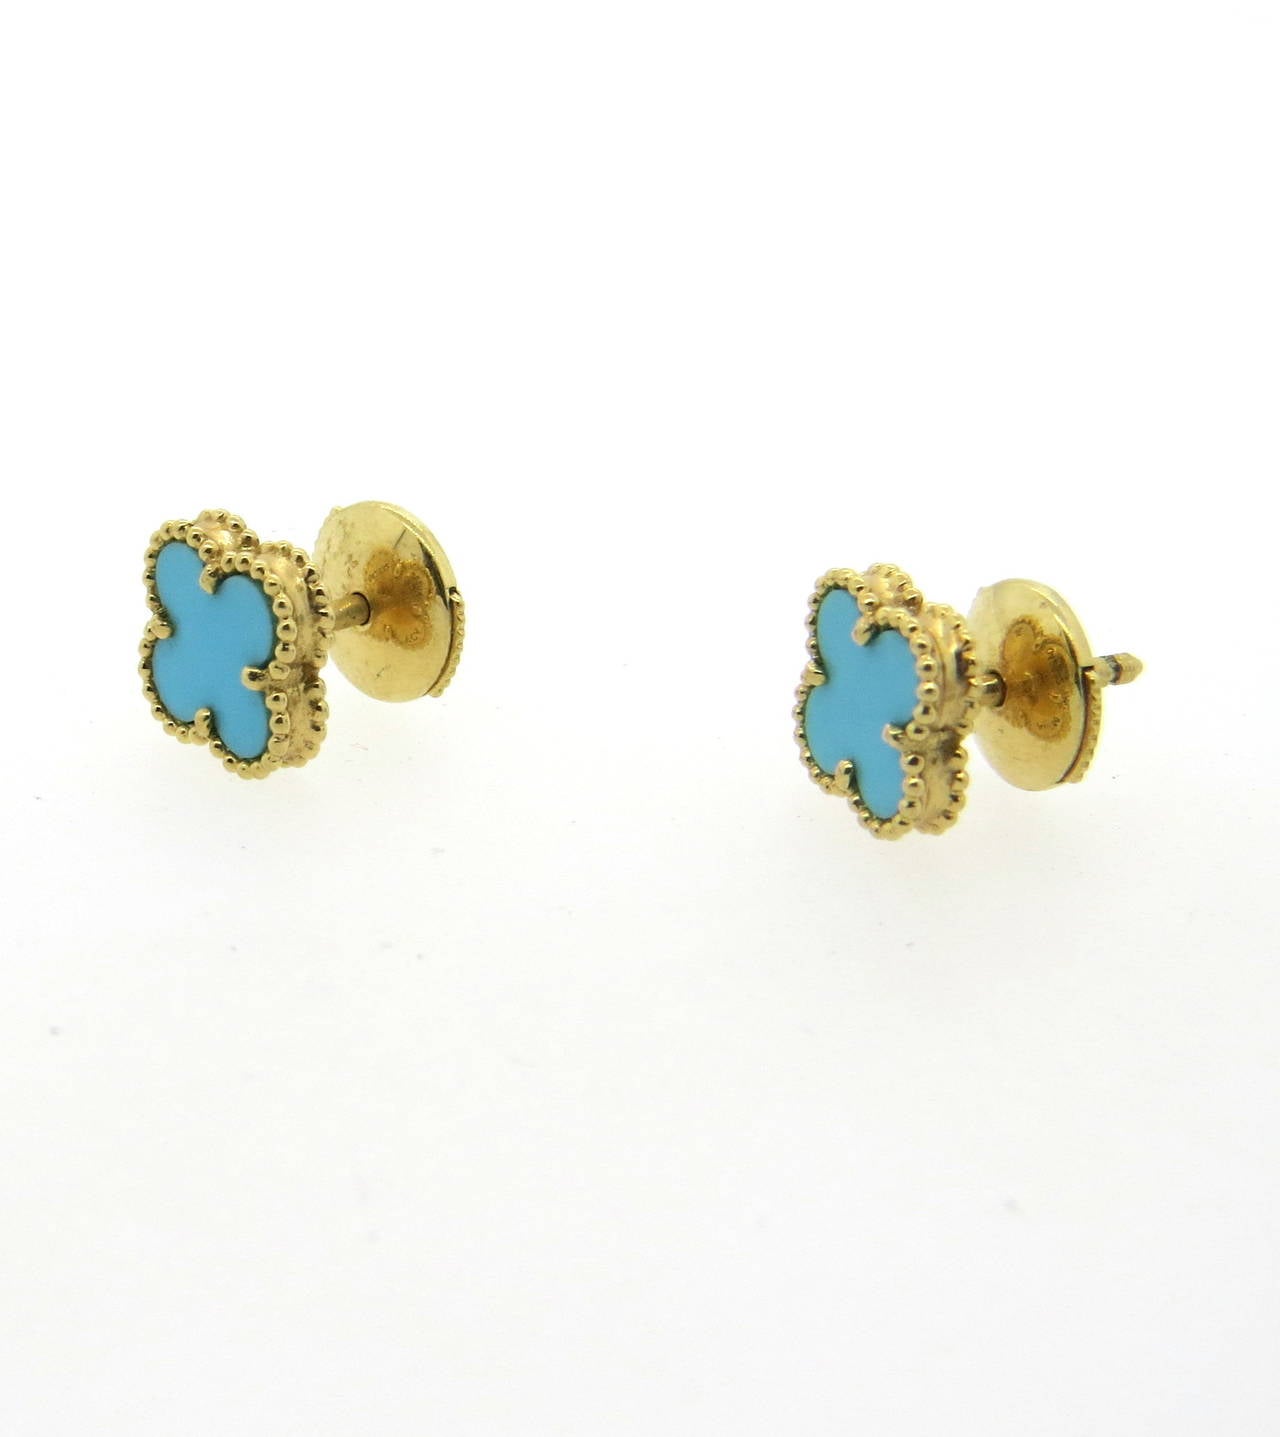 Van Cleef & Arpels 18k gold stud earrings, set with turquoise, from Sweet Alhambra collection. Clovers measure 9.2mm x 9.1mm. Marked VCA,Au750,042832. Weight of the earrings - 2.5 grams
Retail for $3200